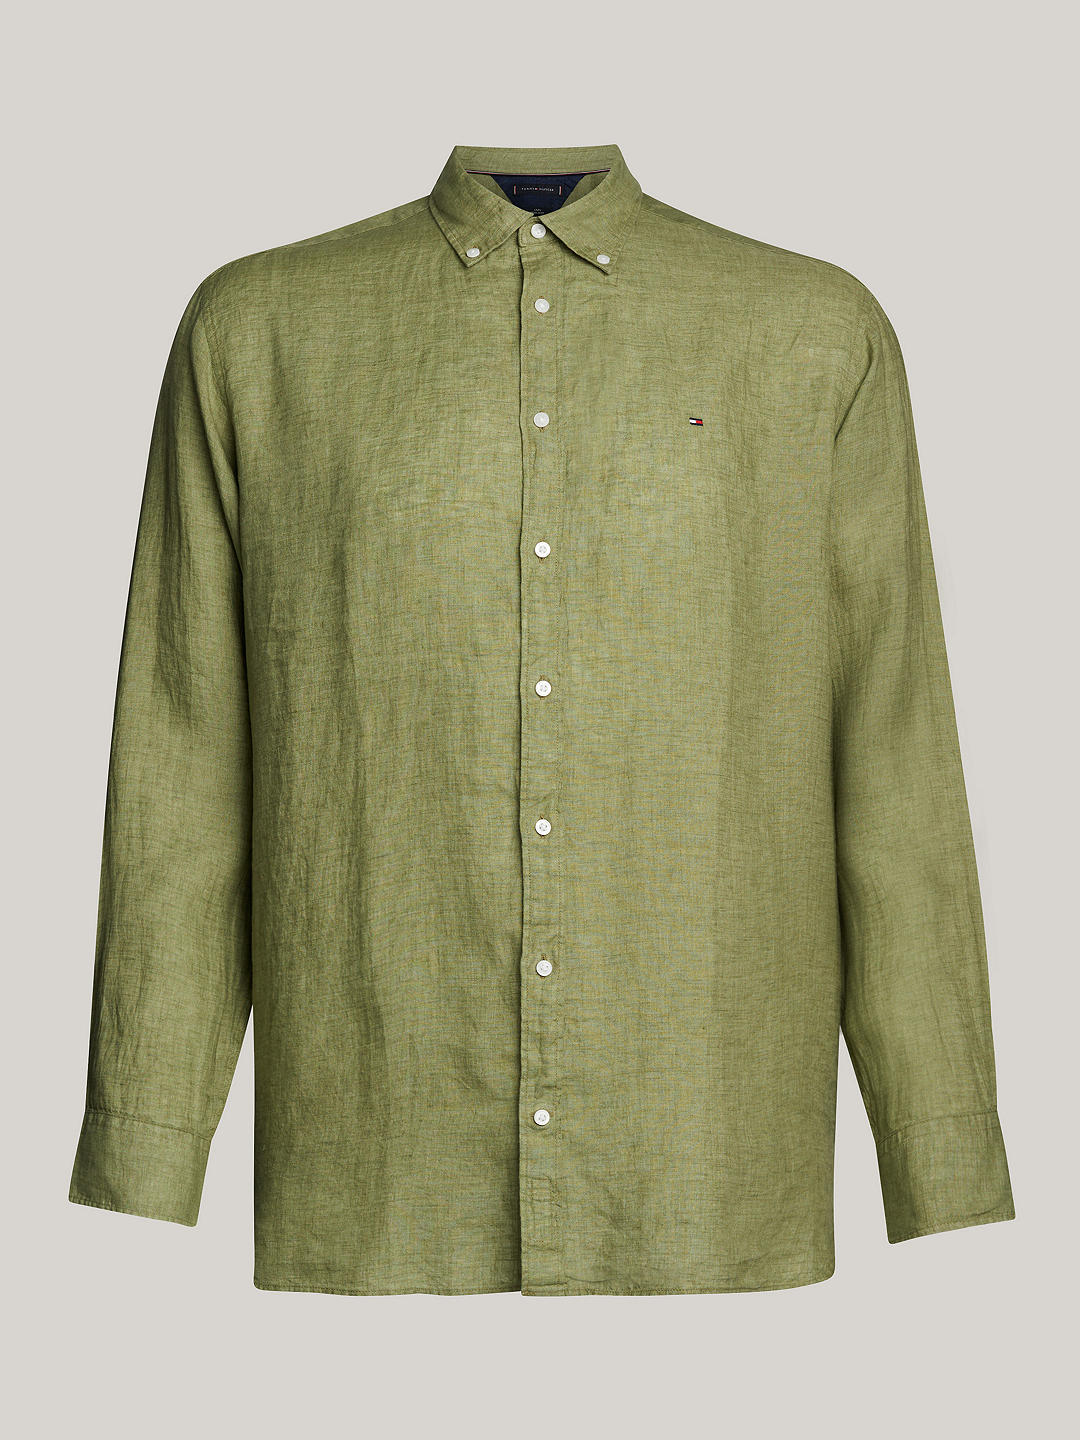 Tommy Hilfiger Big & Tall Linen Long Sleeve Shirt, Faded Olive